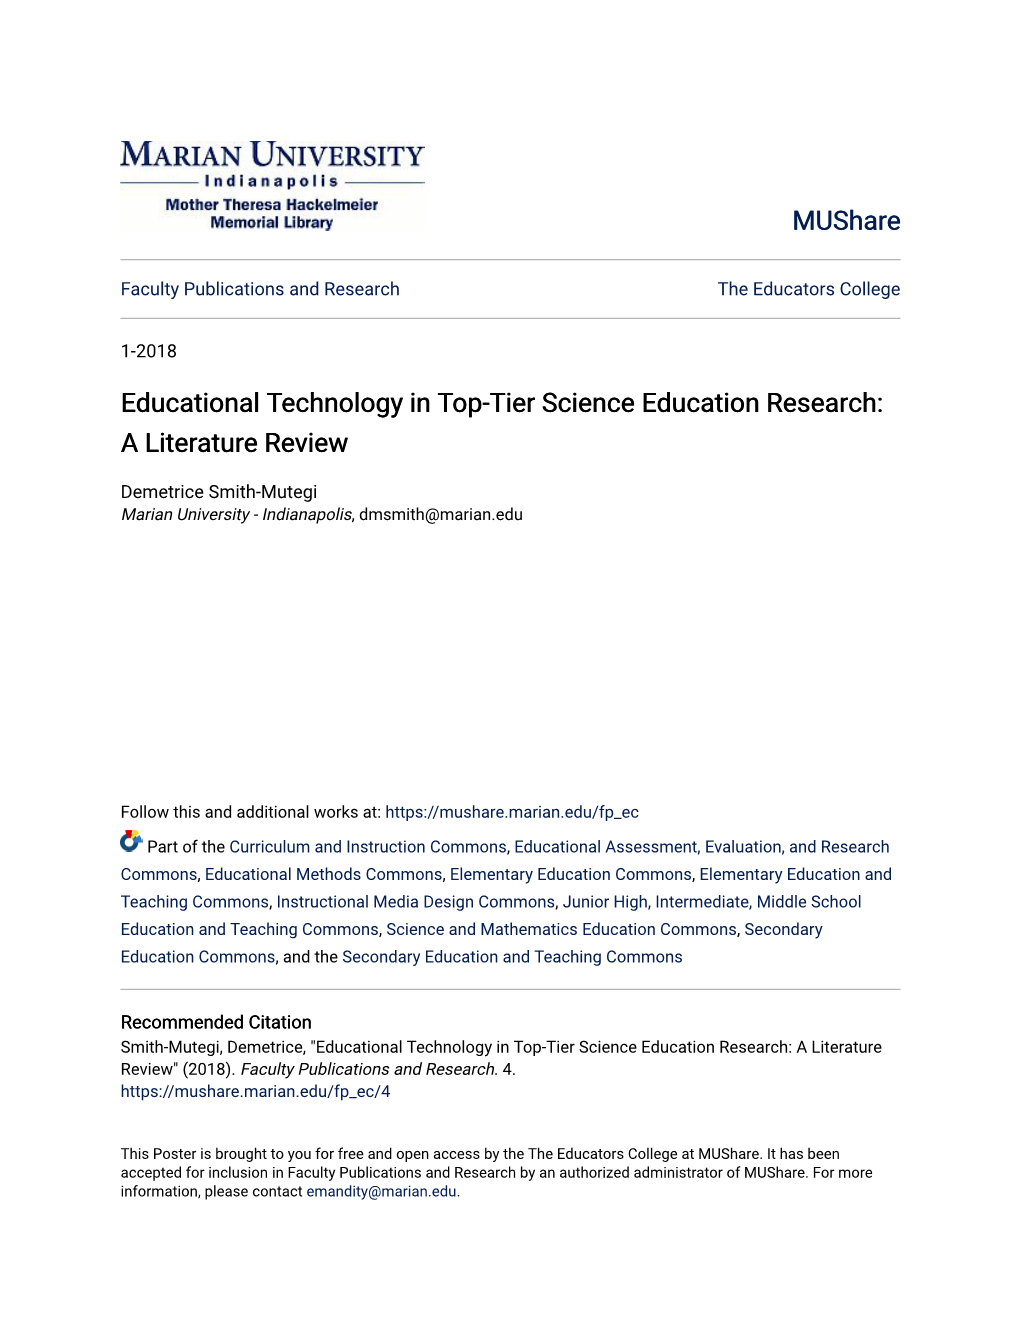 Educational Technology in Top-Tier Science Education Research: a Literature Review